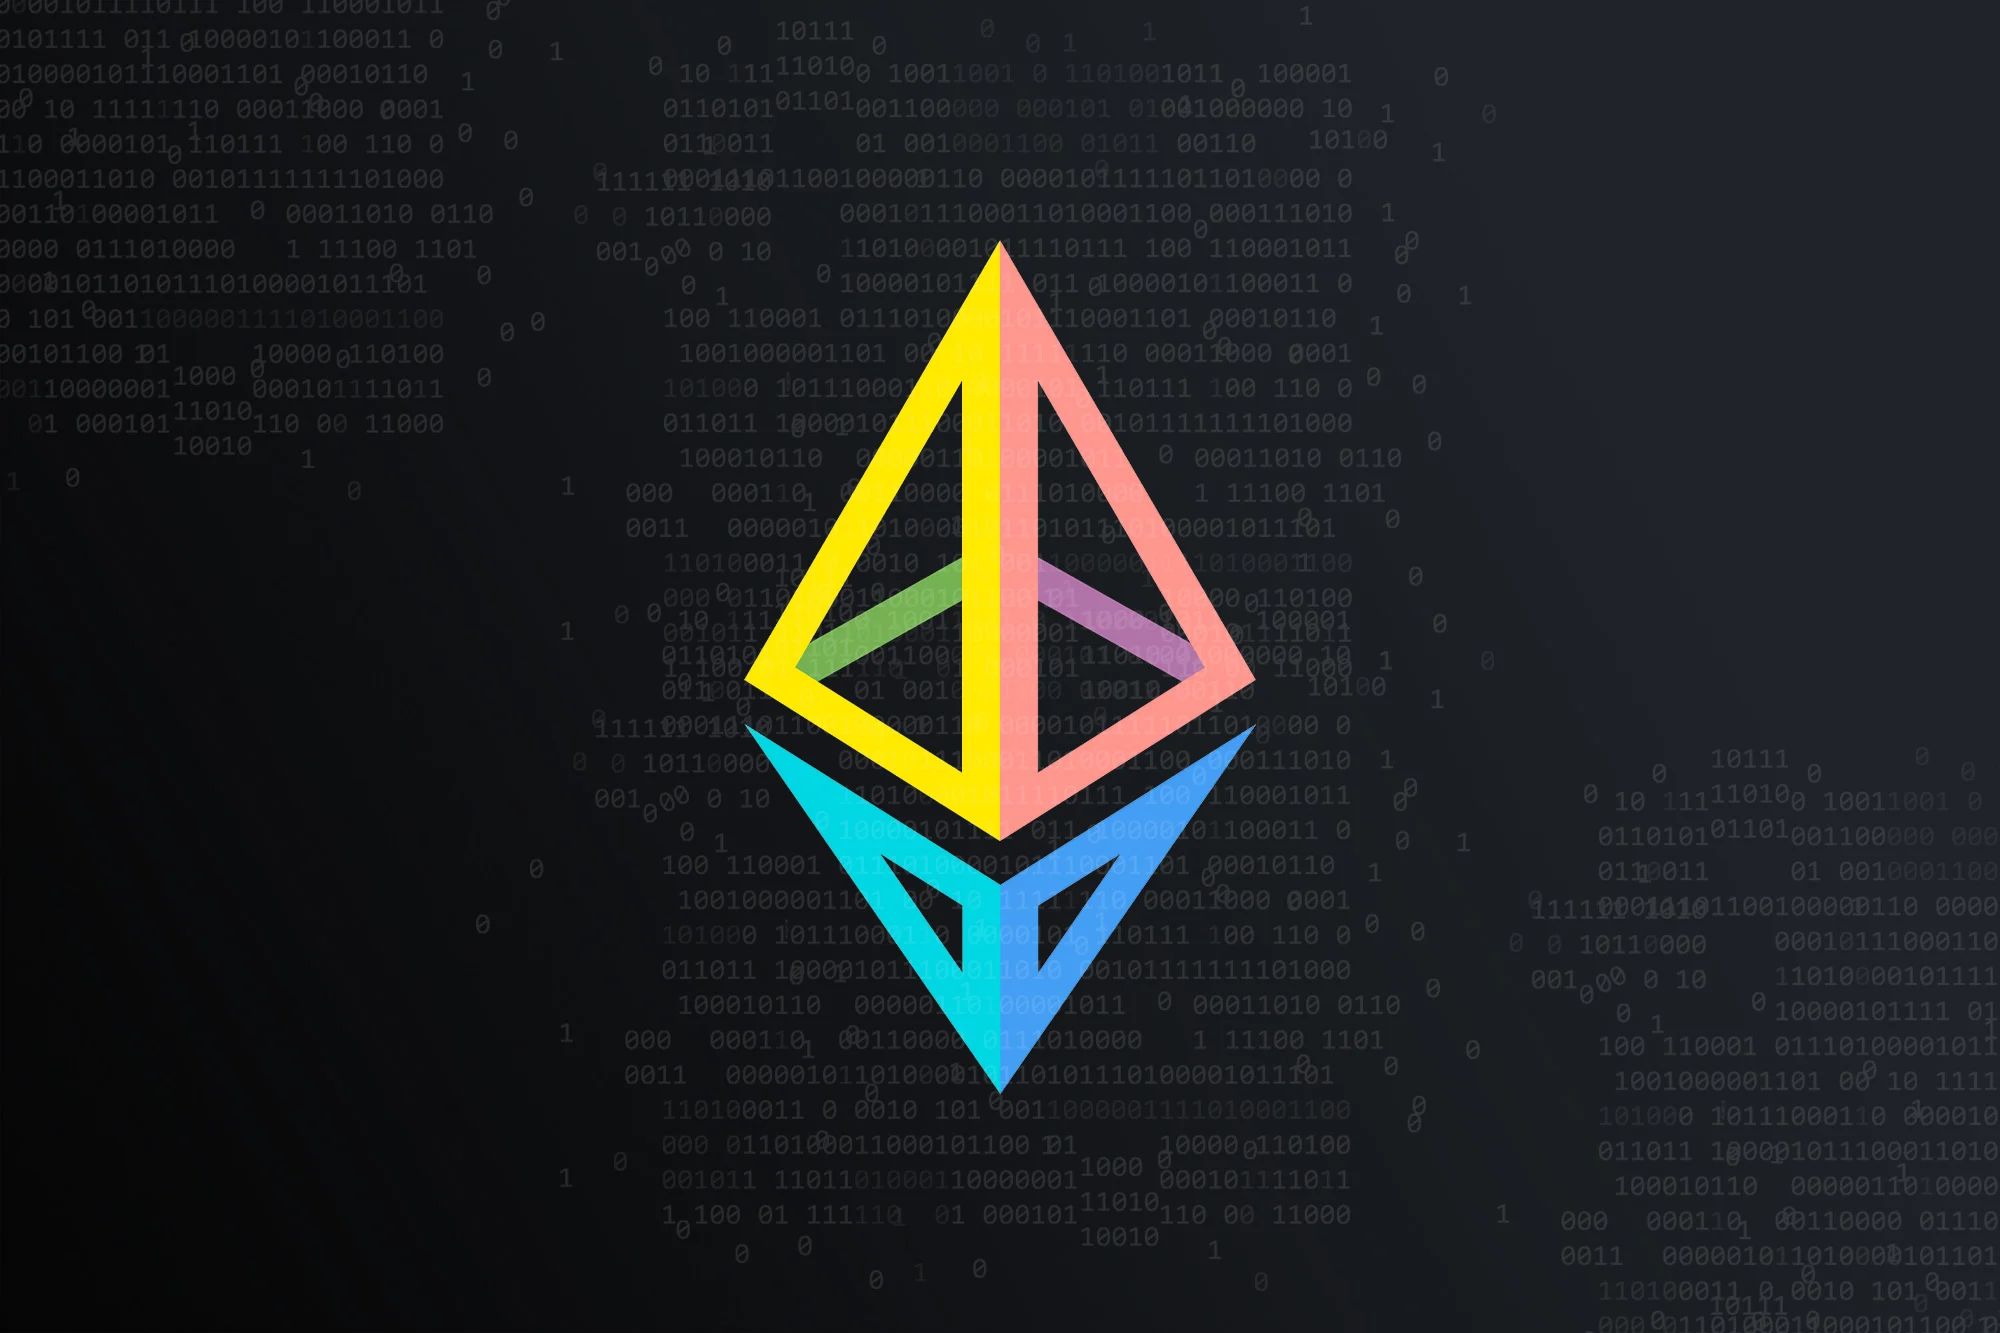 Image: The State of the Ethereum Network – July 2019